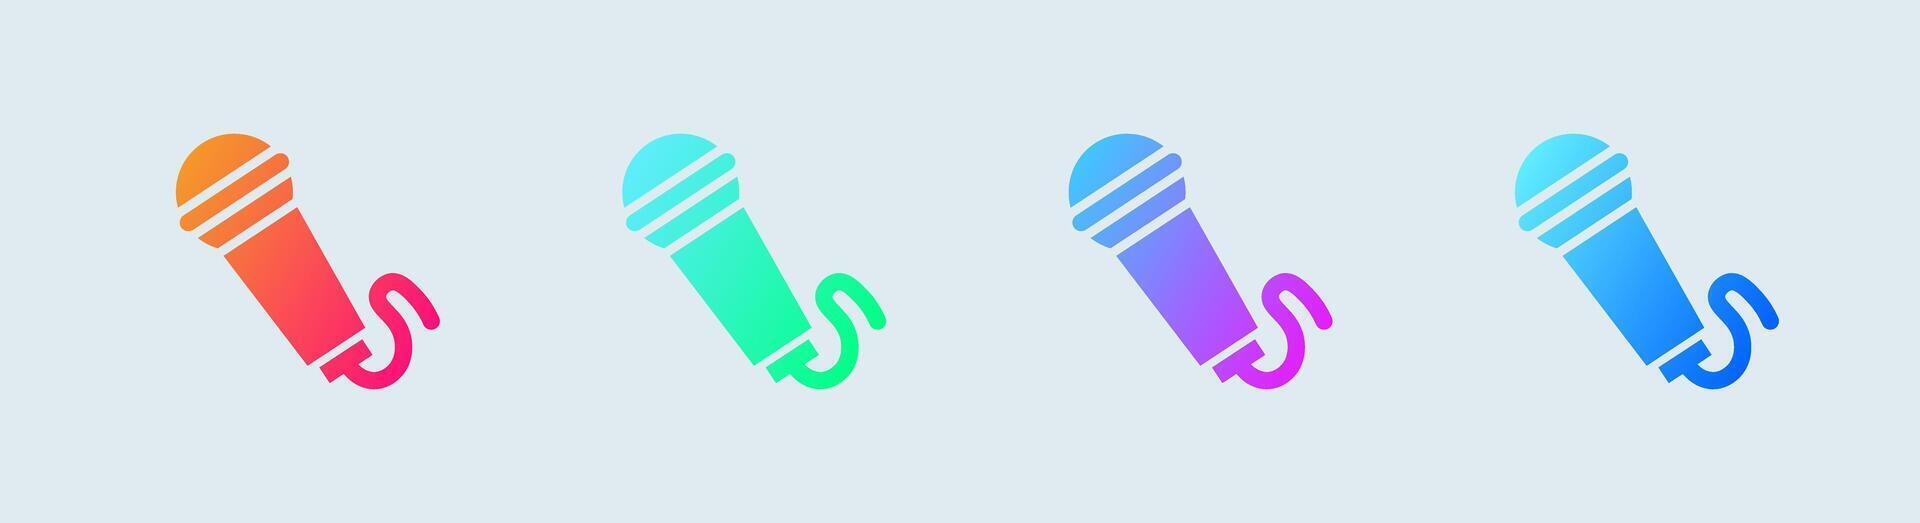 Microphone solid icon in gradient colors. Voice signs vector illustratoion.